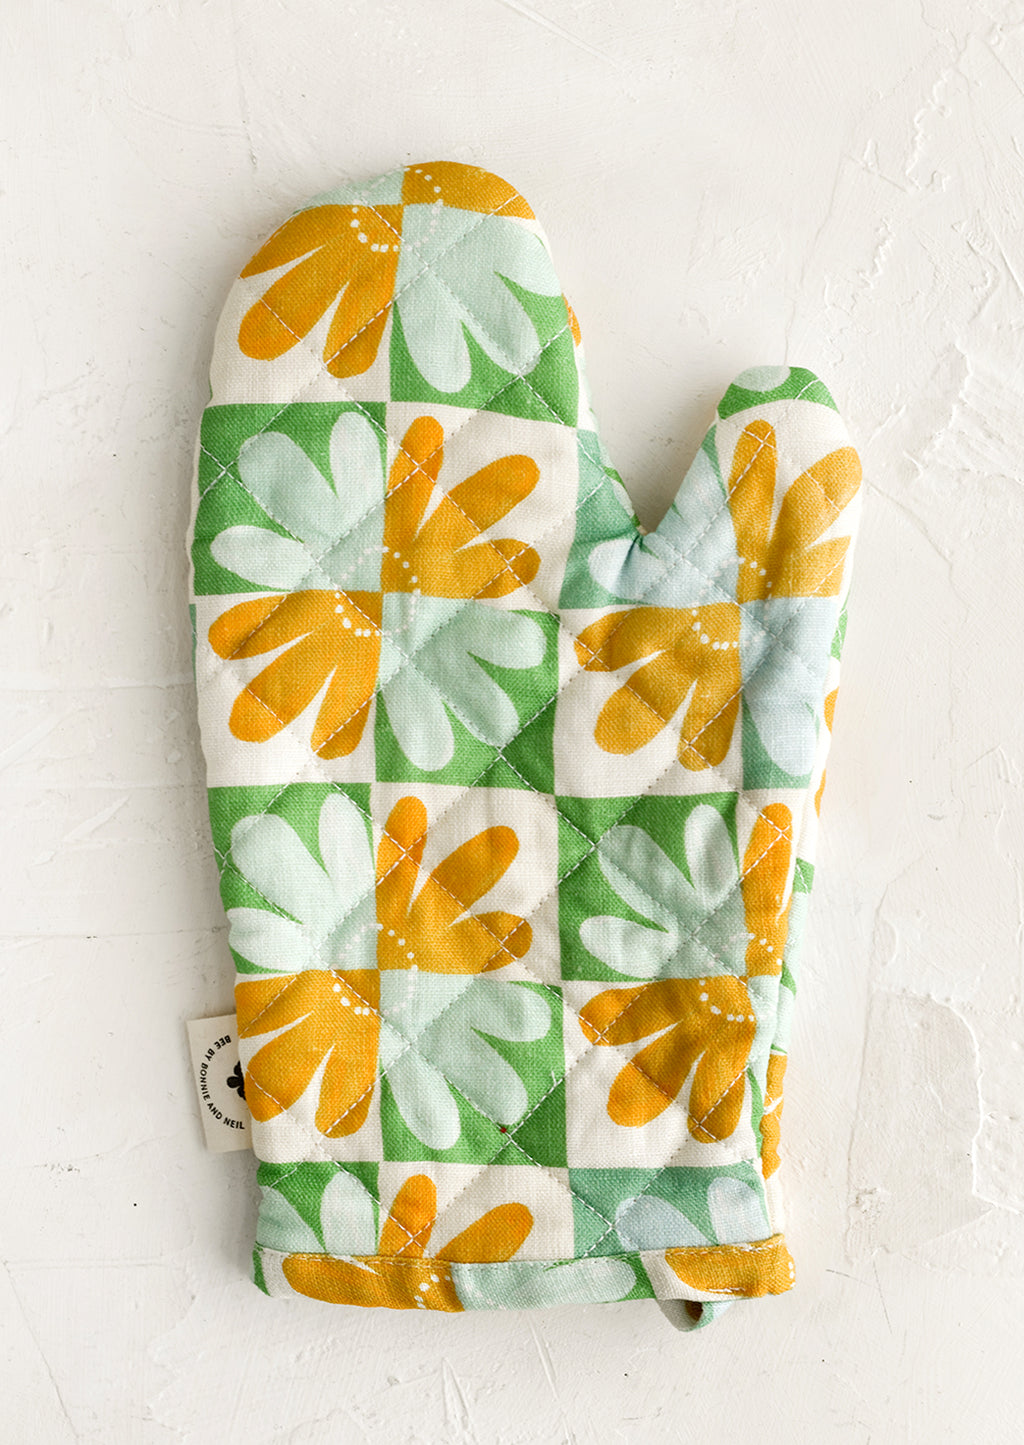 Herb Multi: A retro floral print quilted oven mitt in mint, yellow and green.